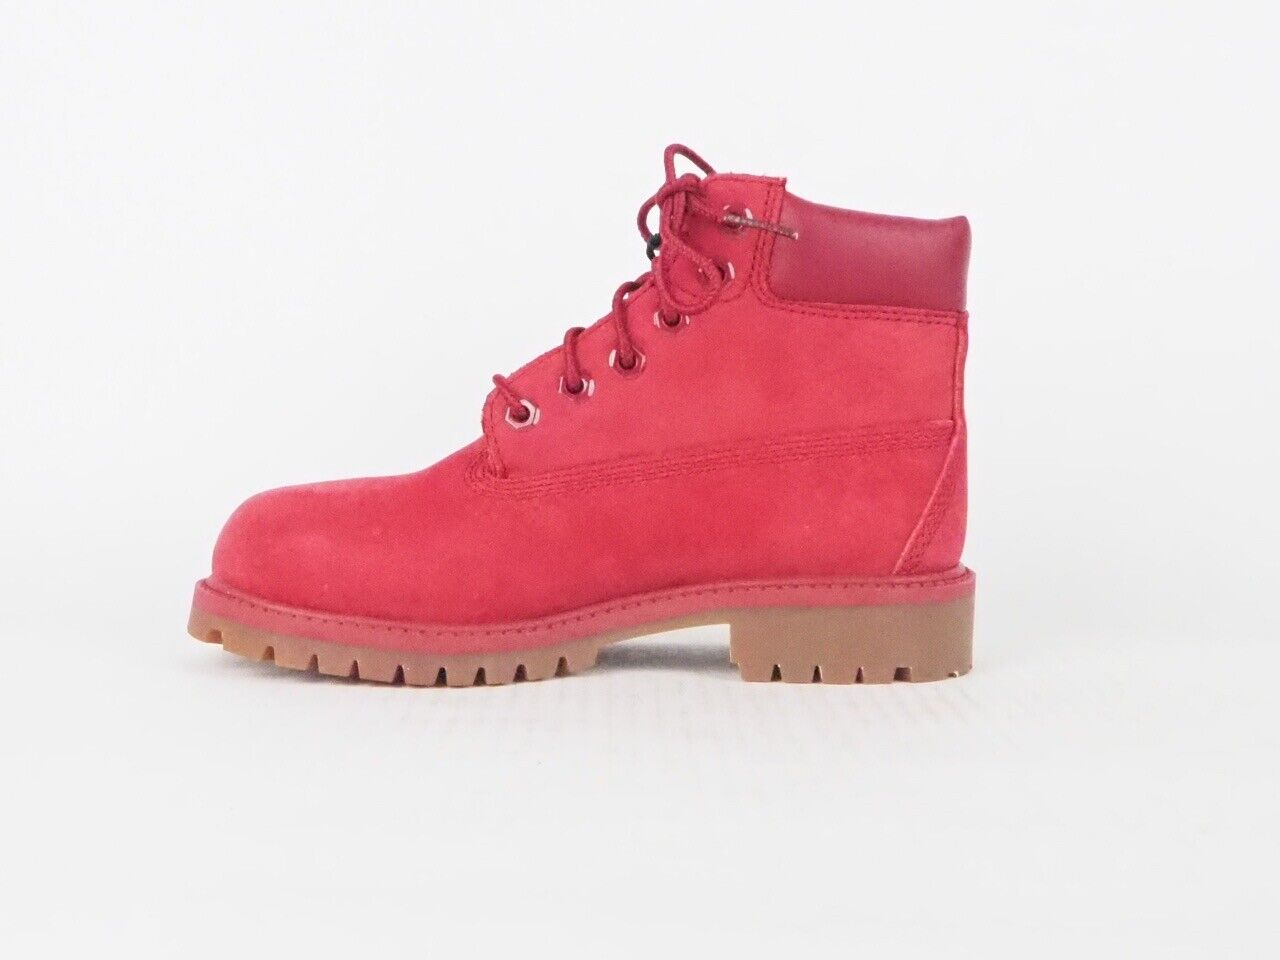 Unisex Timberland Classic Premium 6 Inch A14TE Red Leather Lace Waterproof Boots